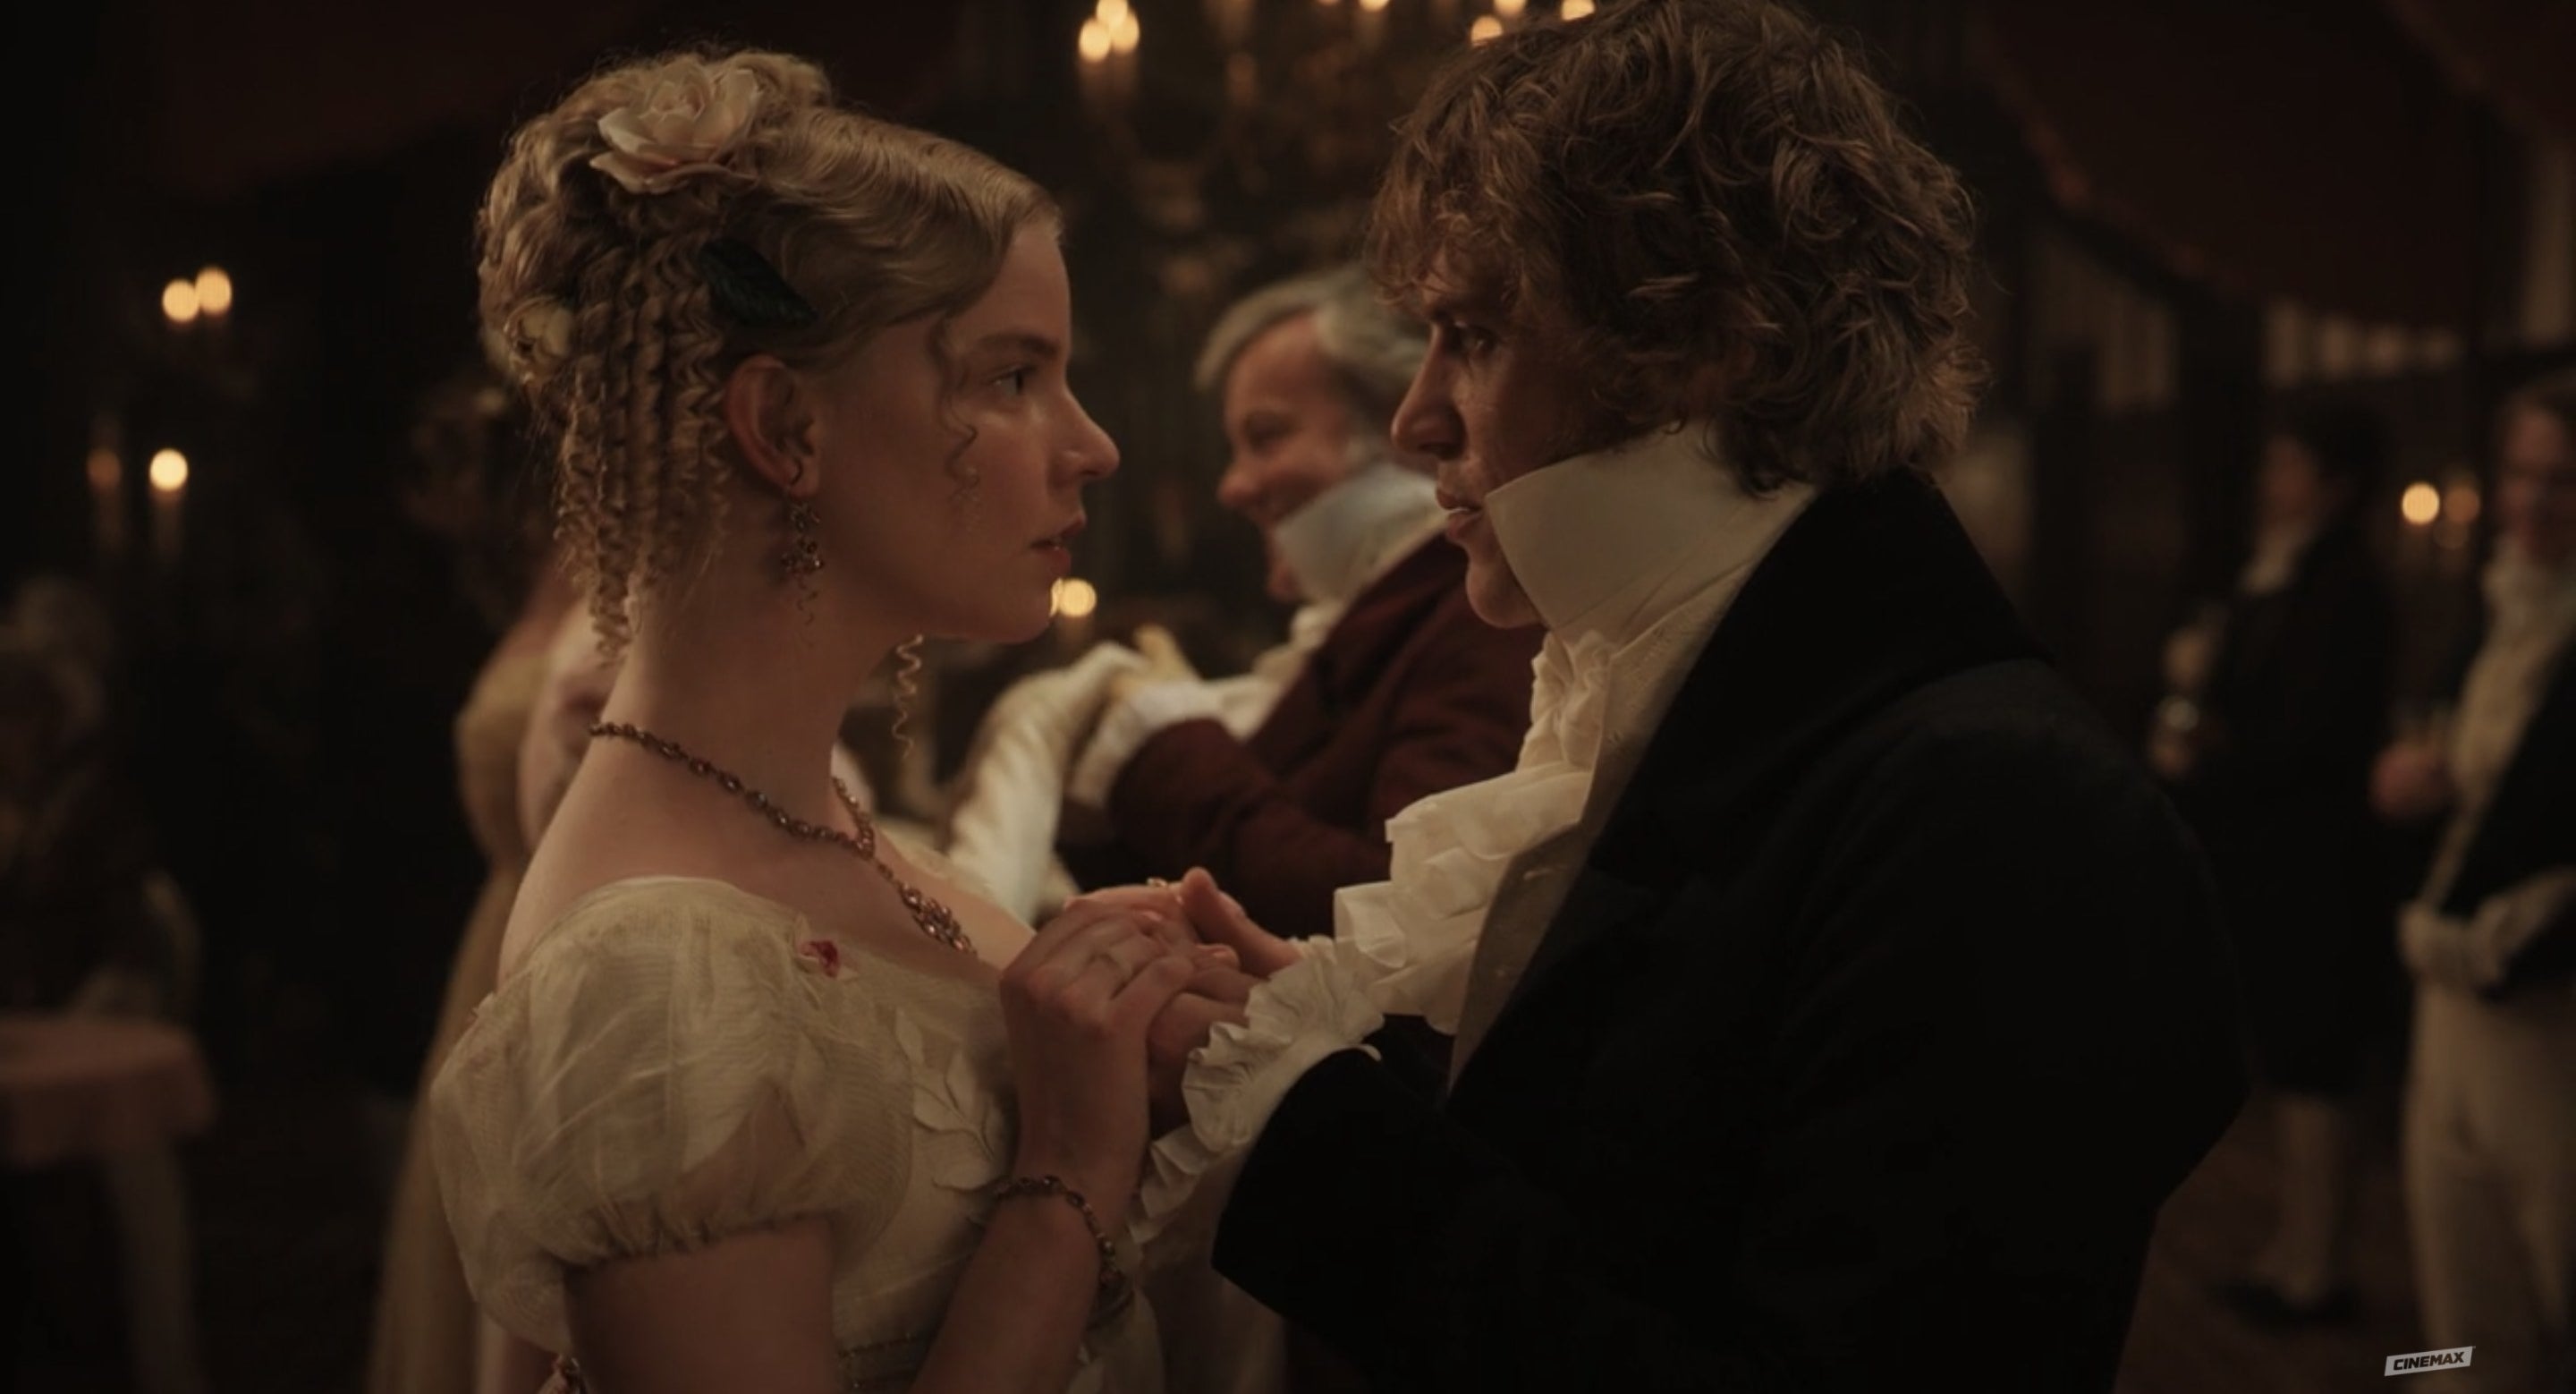 Emma and Knightley lock eyes intensely as they dance